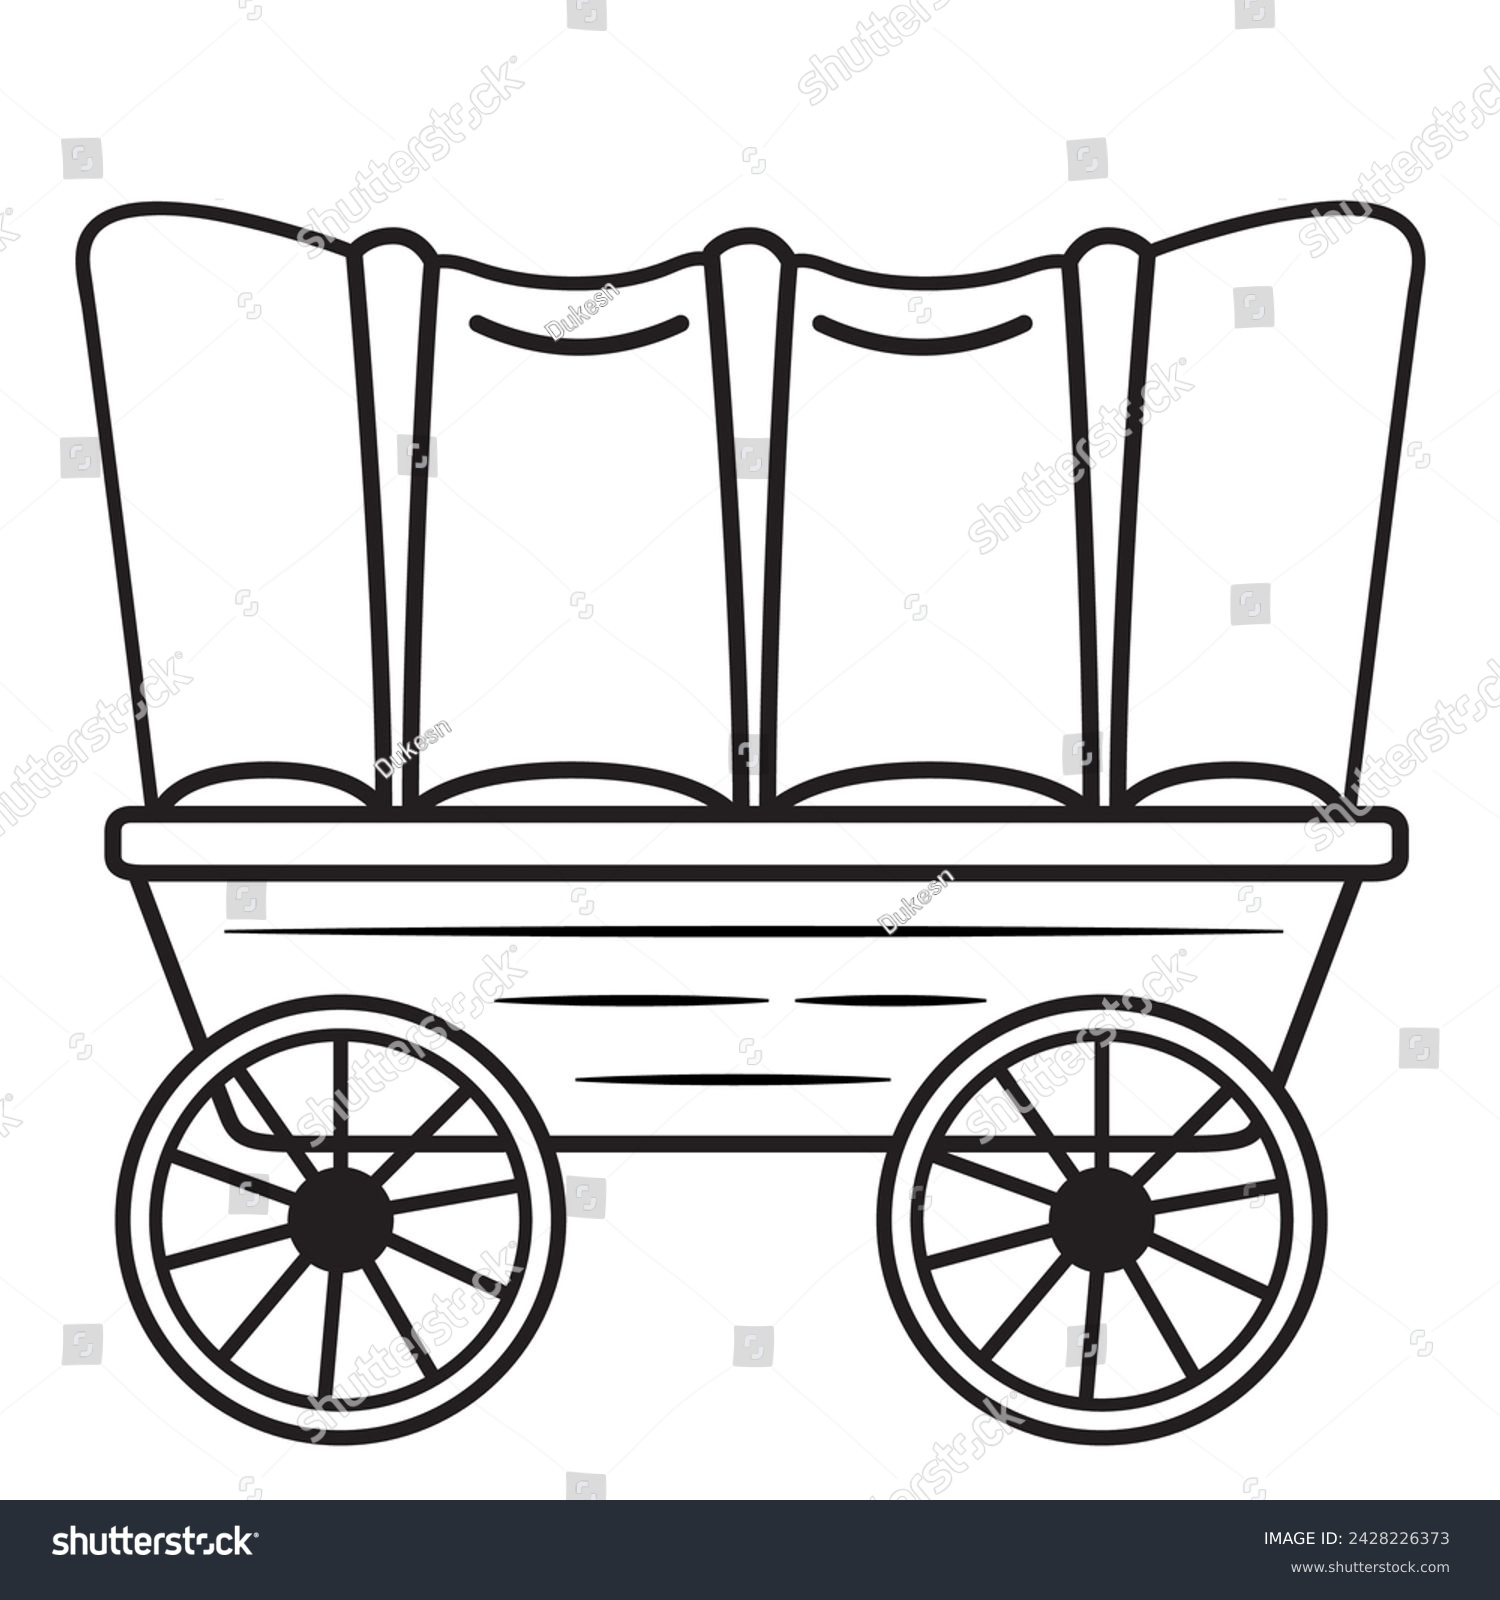 SVG of Wagon wild west.Pioneer covered wagon. Wood covered wagon.Freight moving carriage.Doodle sketch style. Outline vector illustration. svg